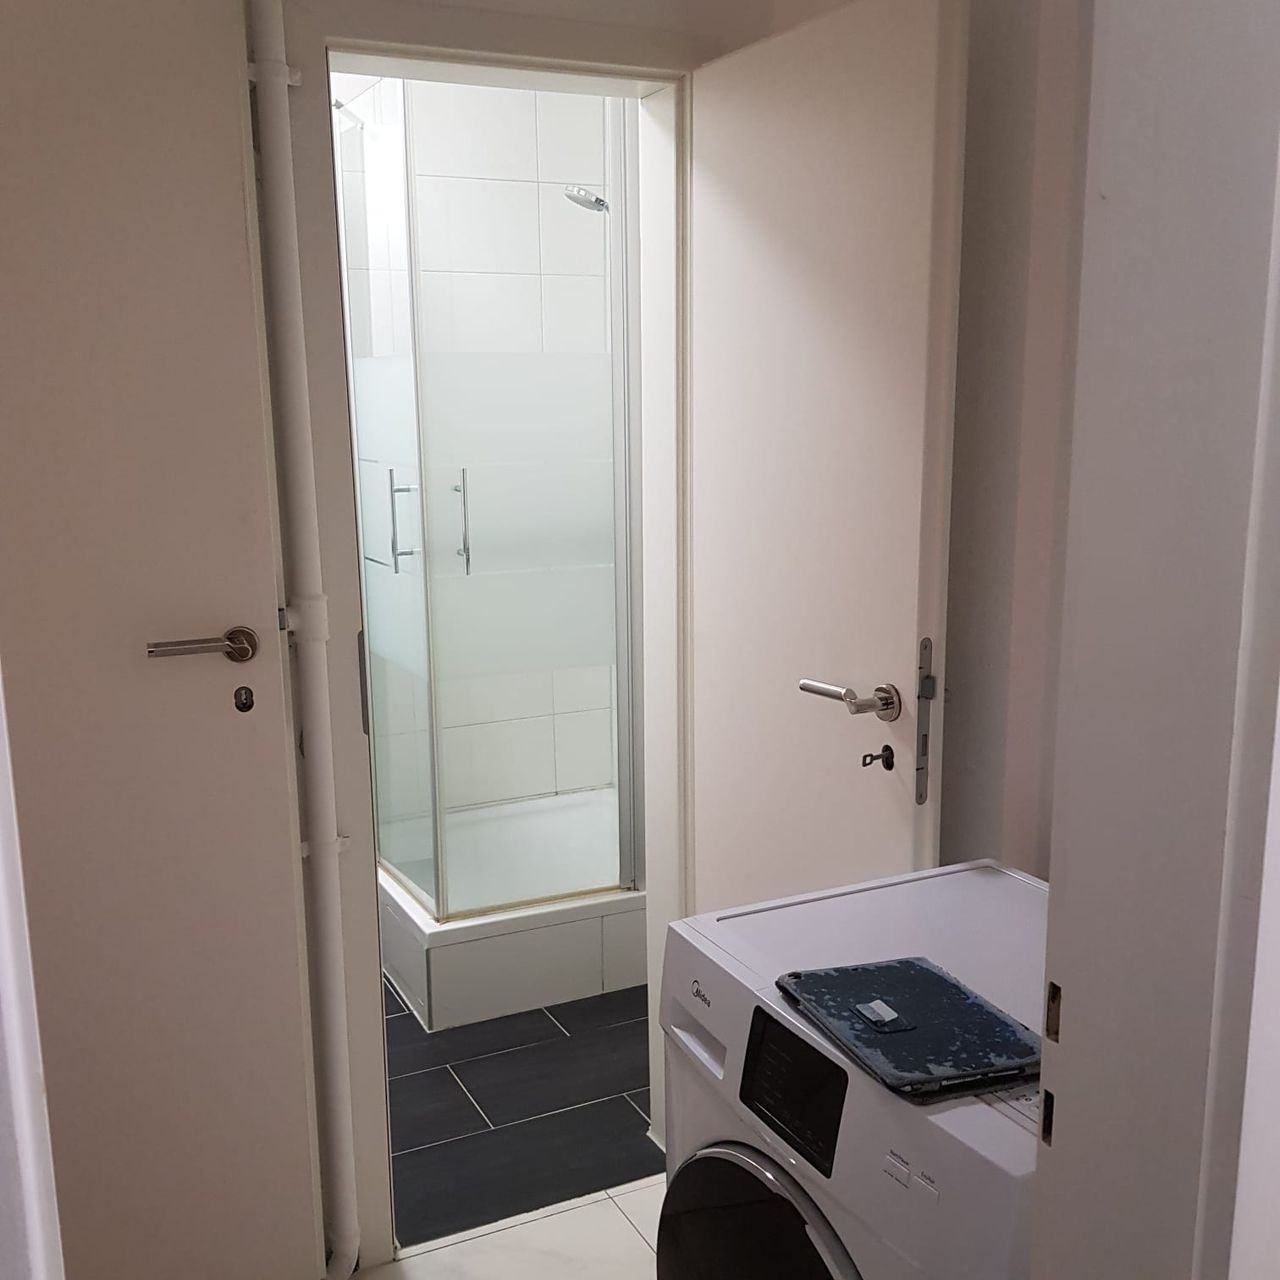 3 room apartment 10 minutes to Stuttgart-UNI as well as to Stuttgart-Mitte